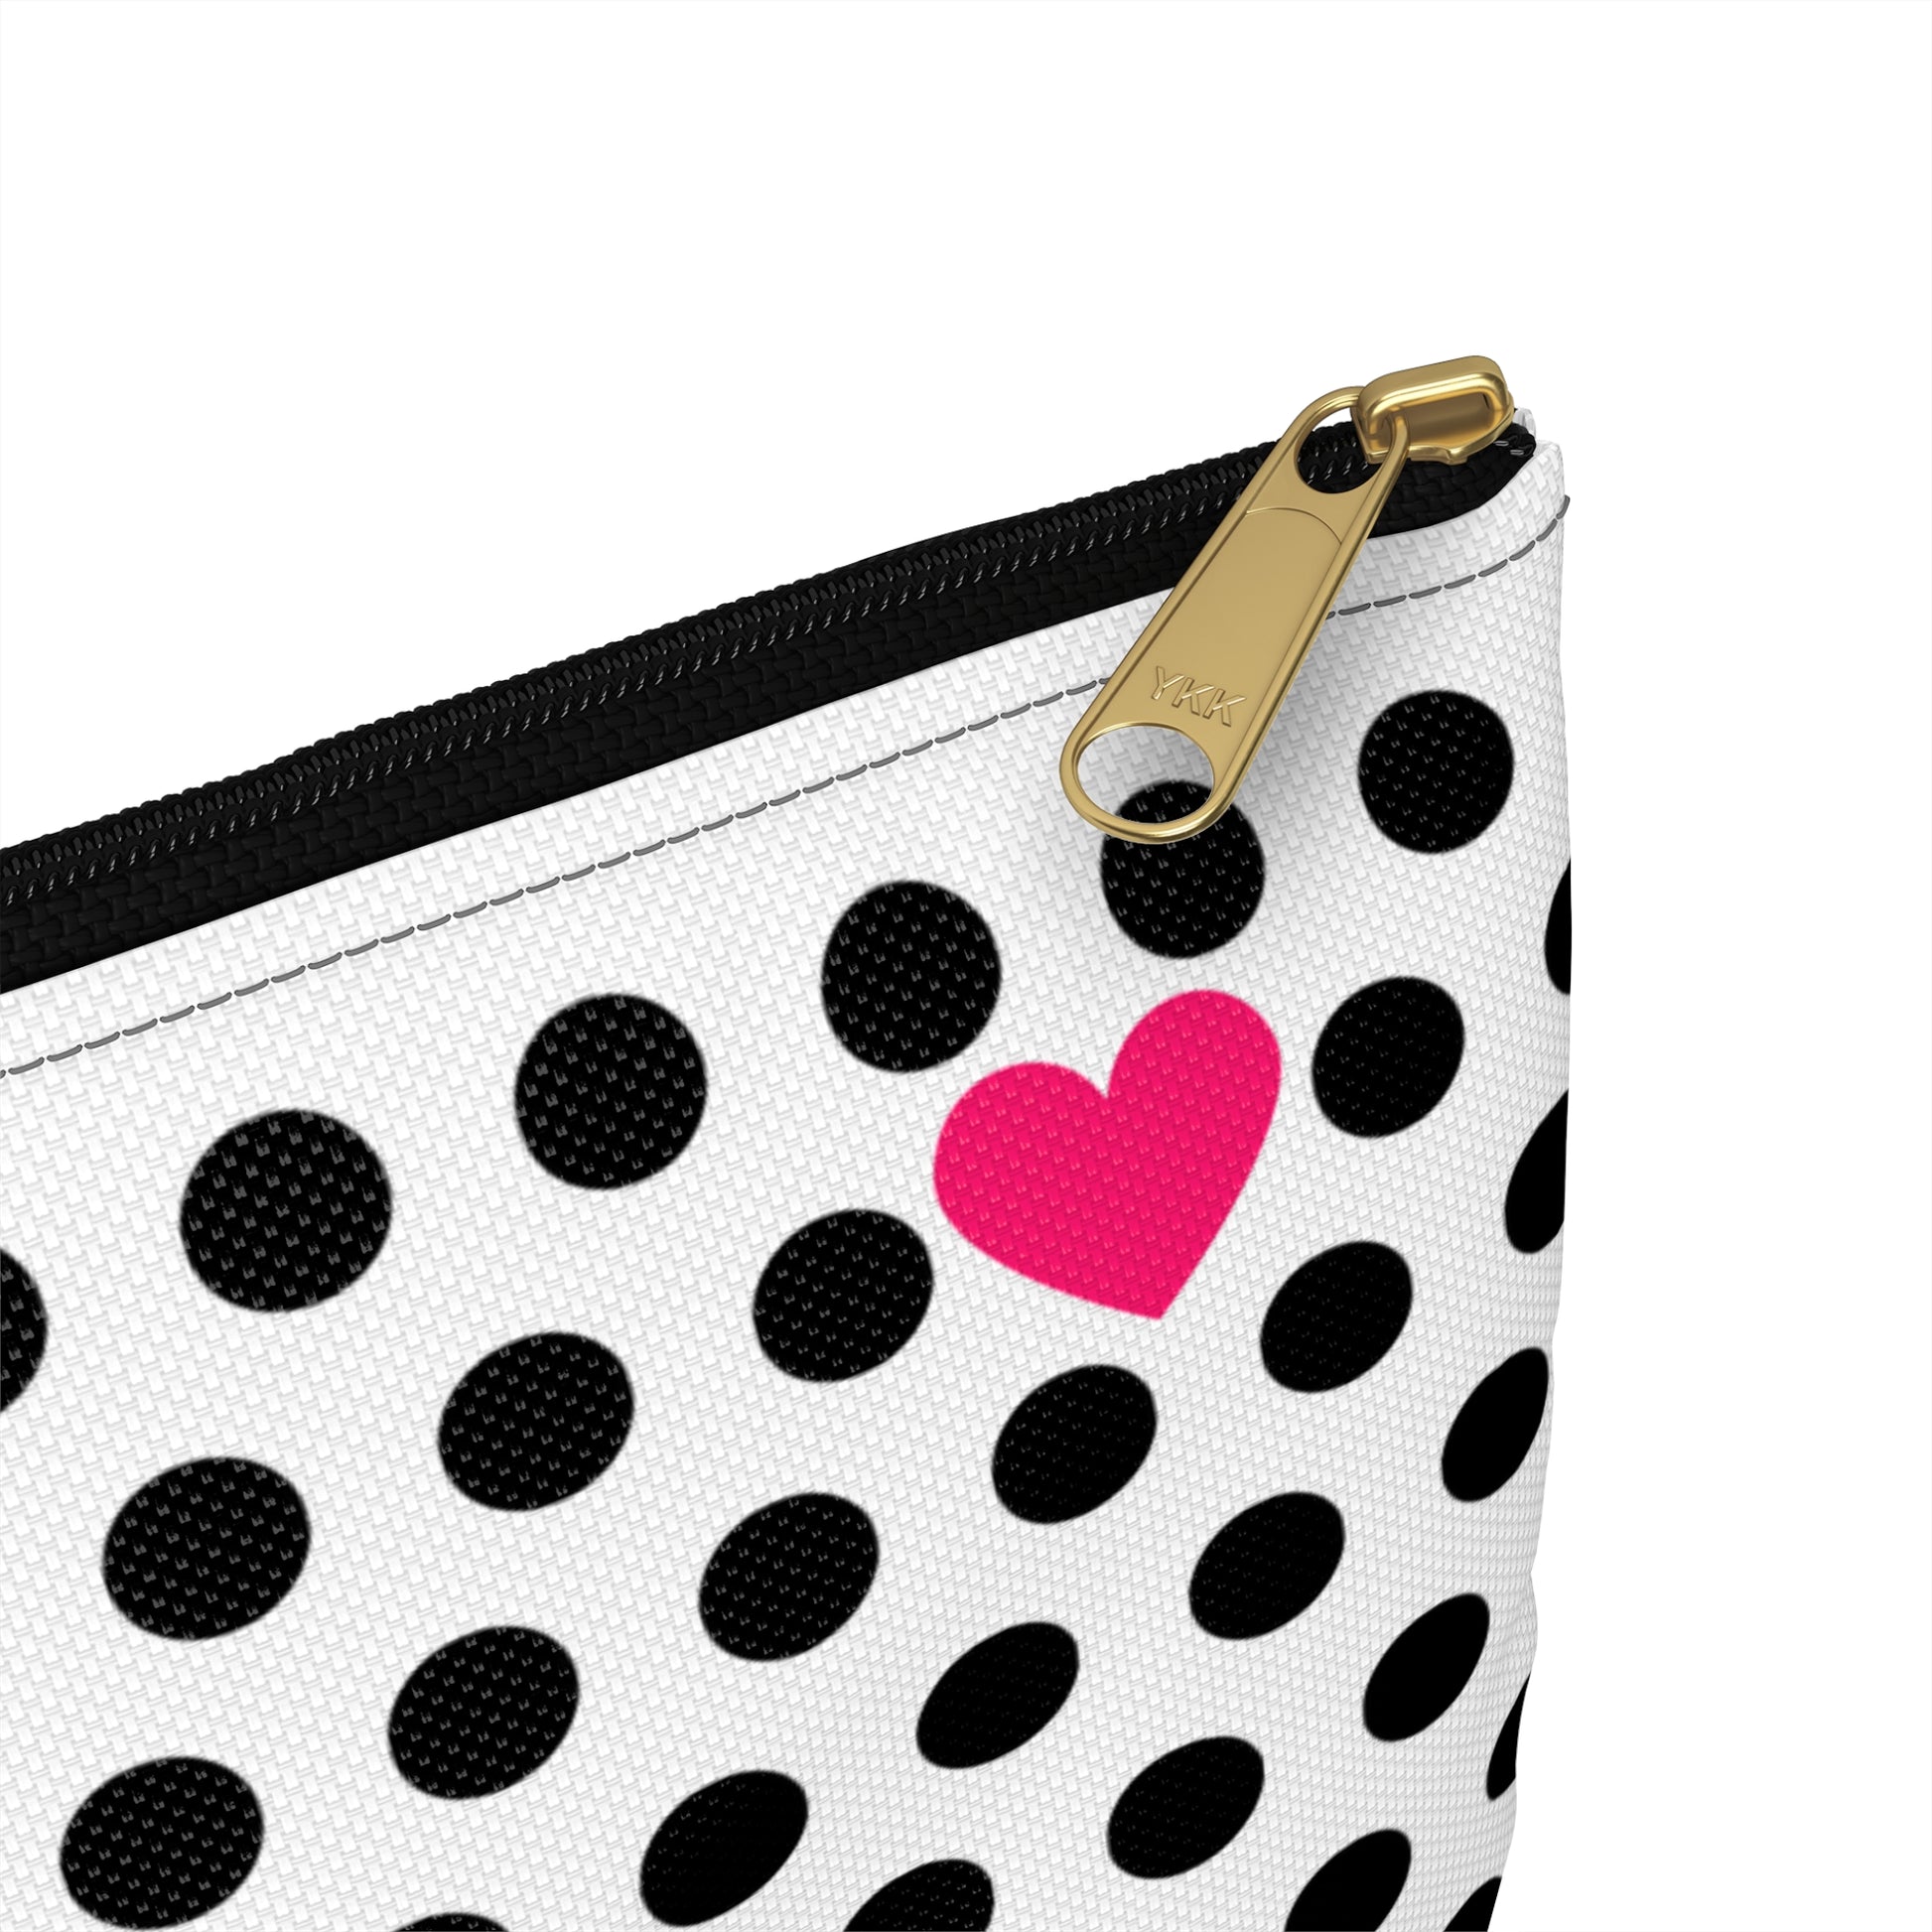 a black and white polka dot purse with a pink heart on it